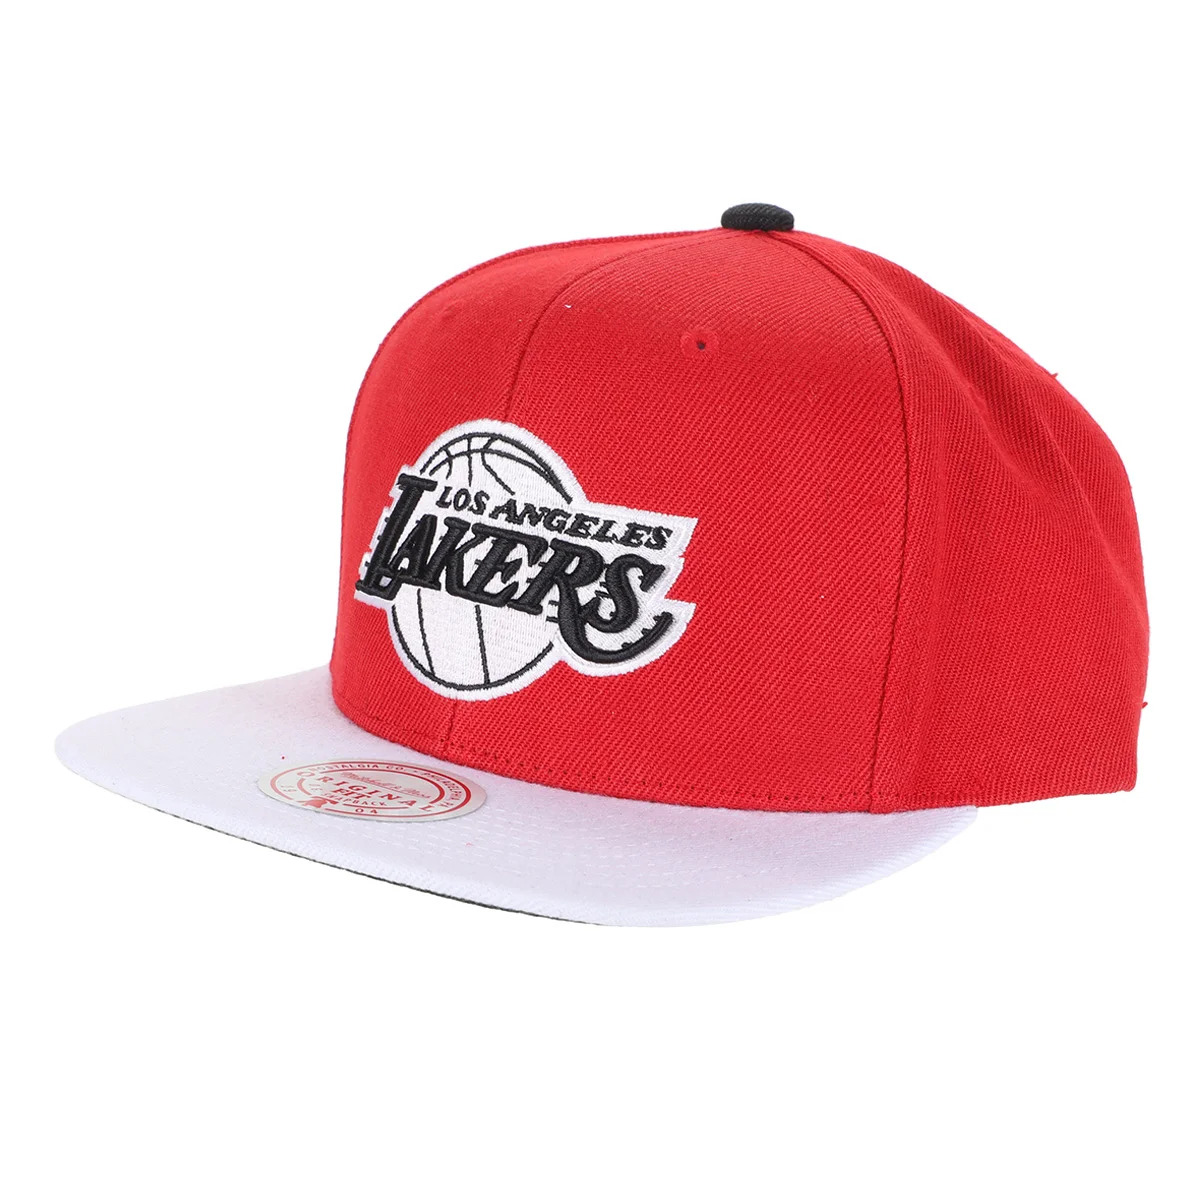 BONÉ MITCHELL & NESS LOS ANGELES LAKERS RED TWO TONE